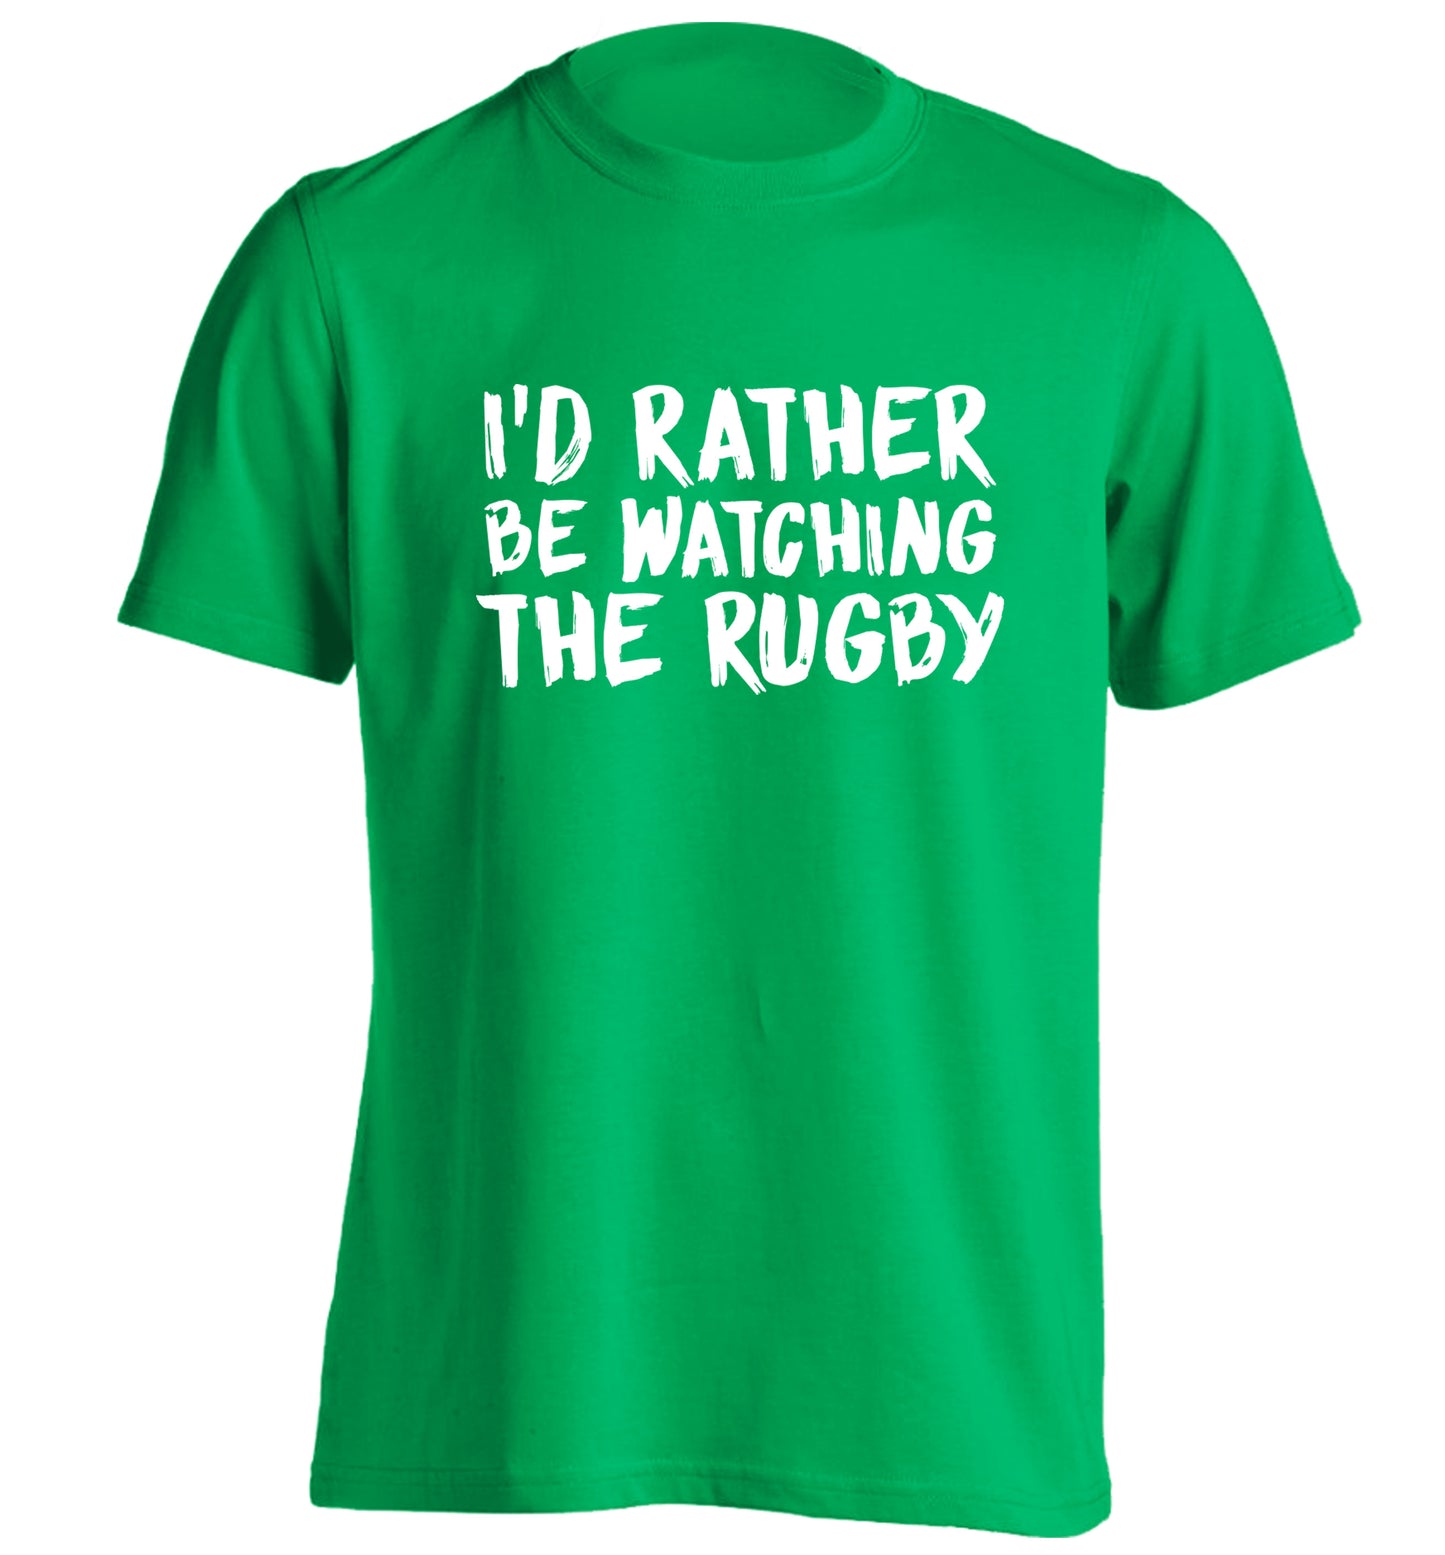 I'd rather be watching the rugby adults unisex green Tshirt 2XL